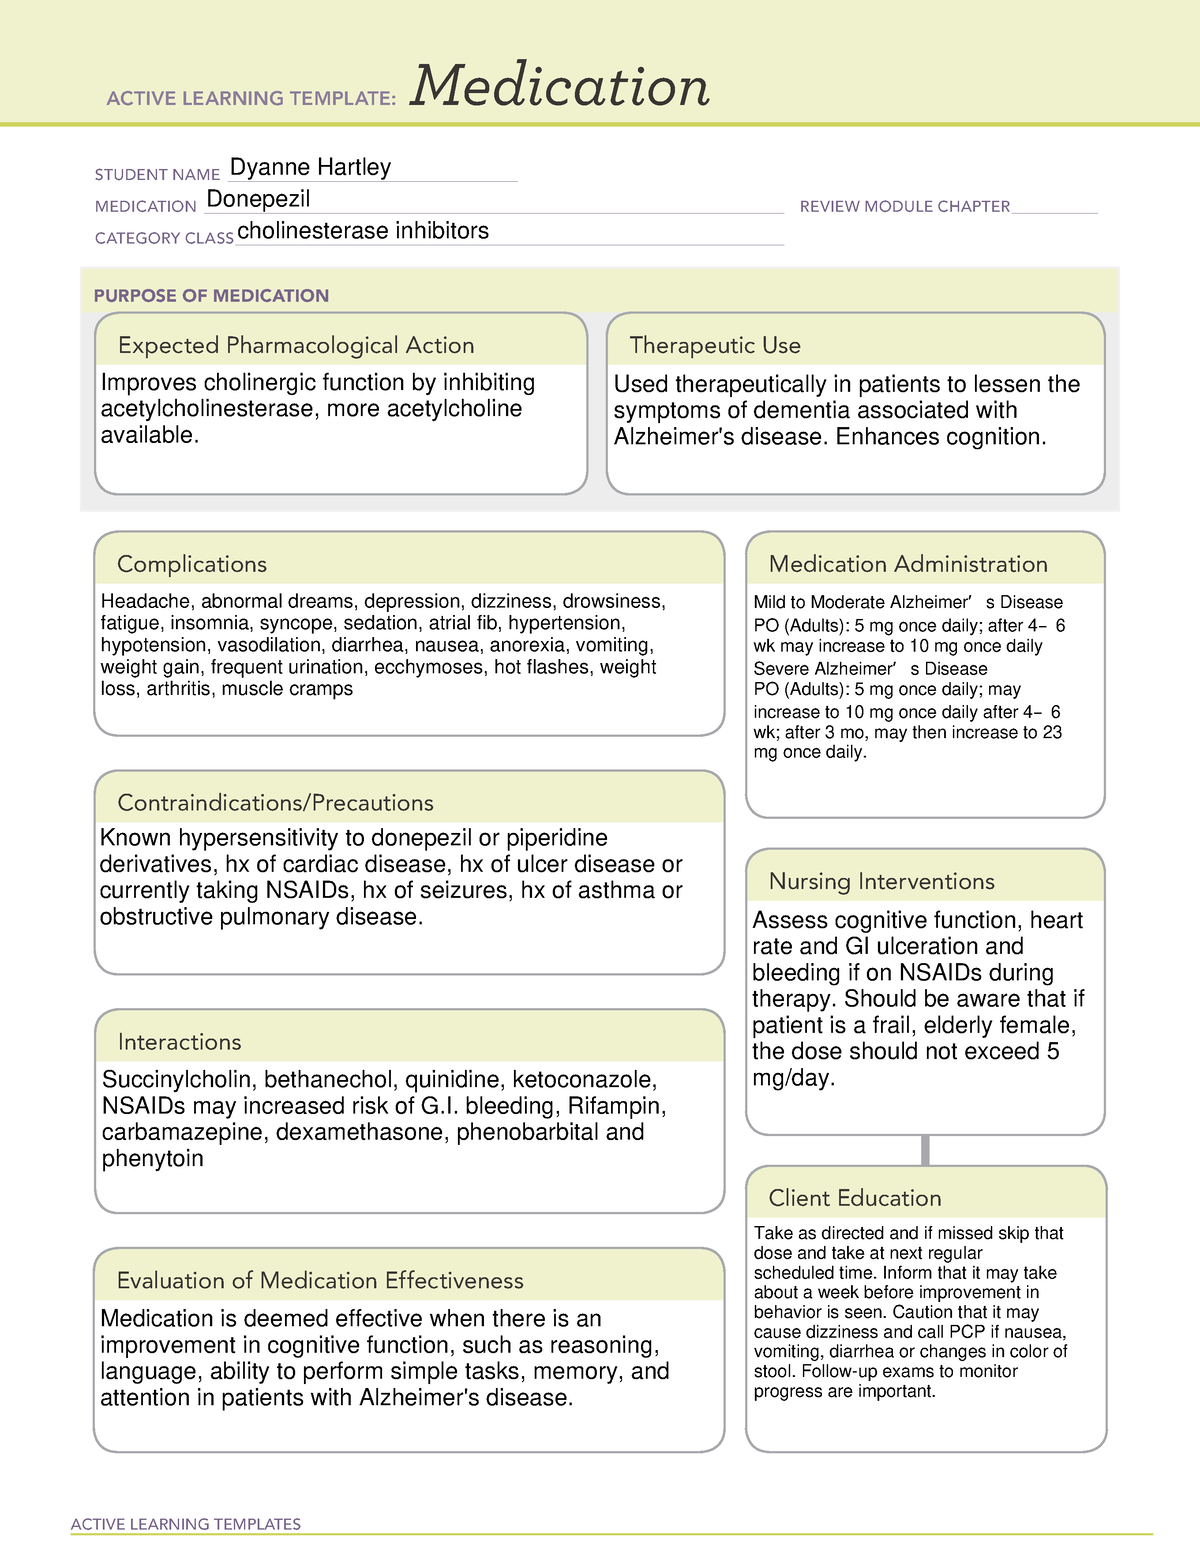 Donepezil ATI Active Learning Templates ACTIVE LEARNING TEMPLATES